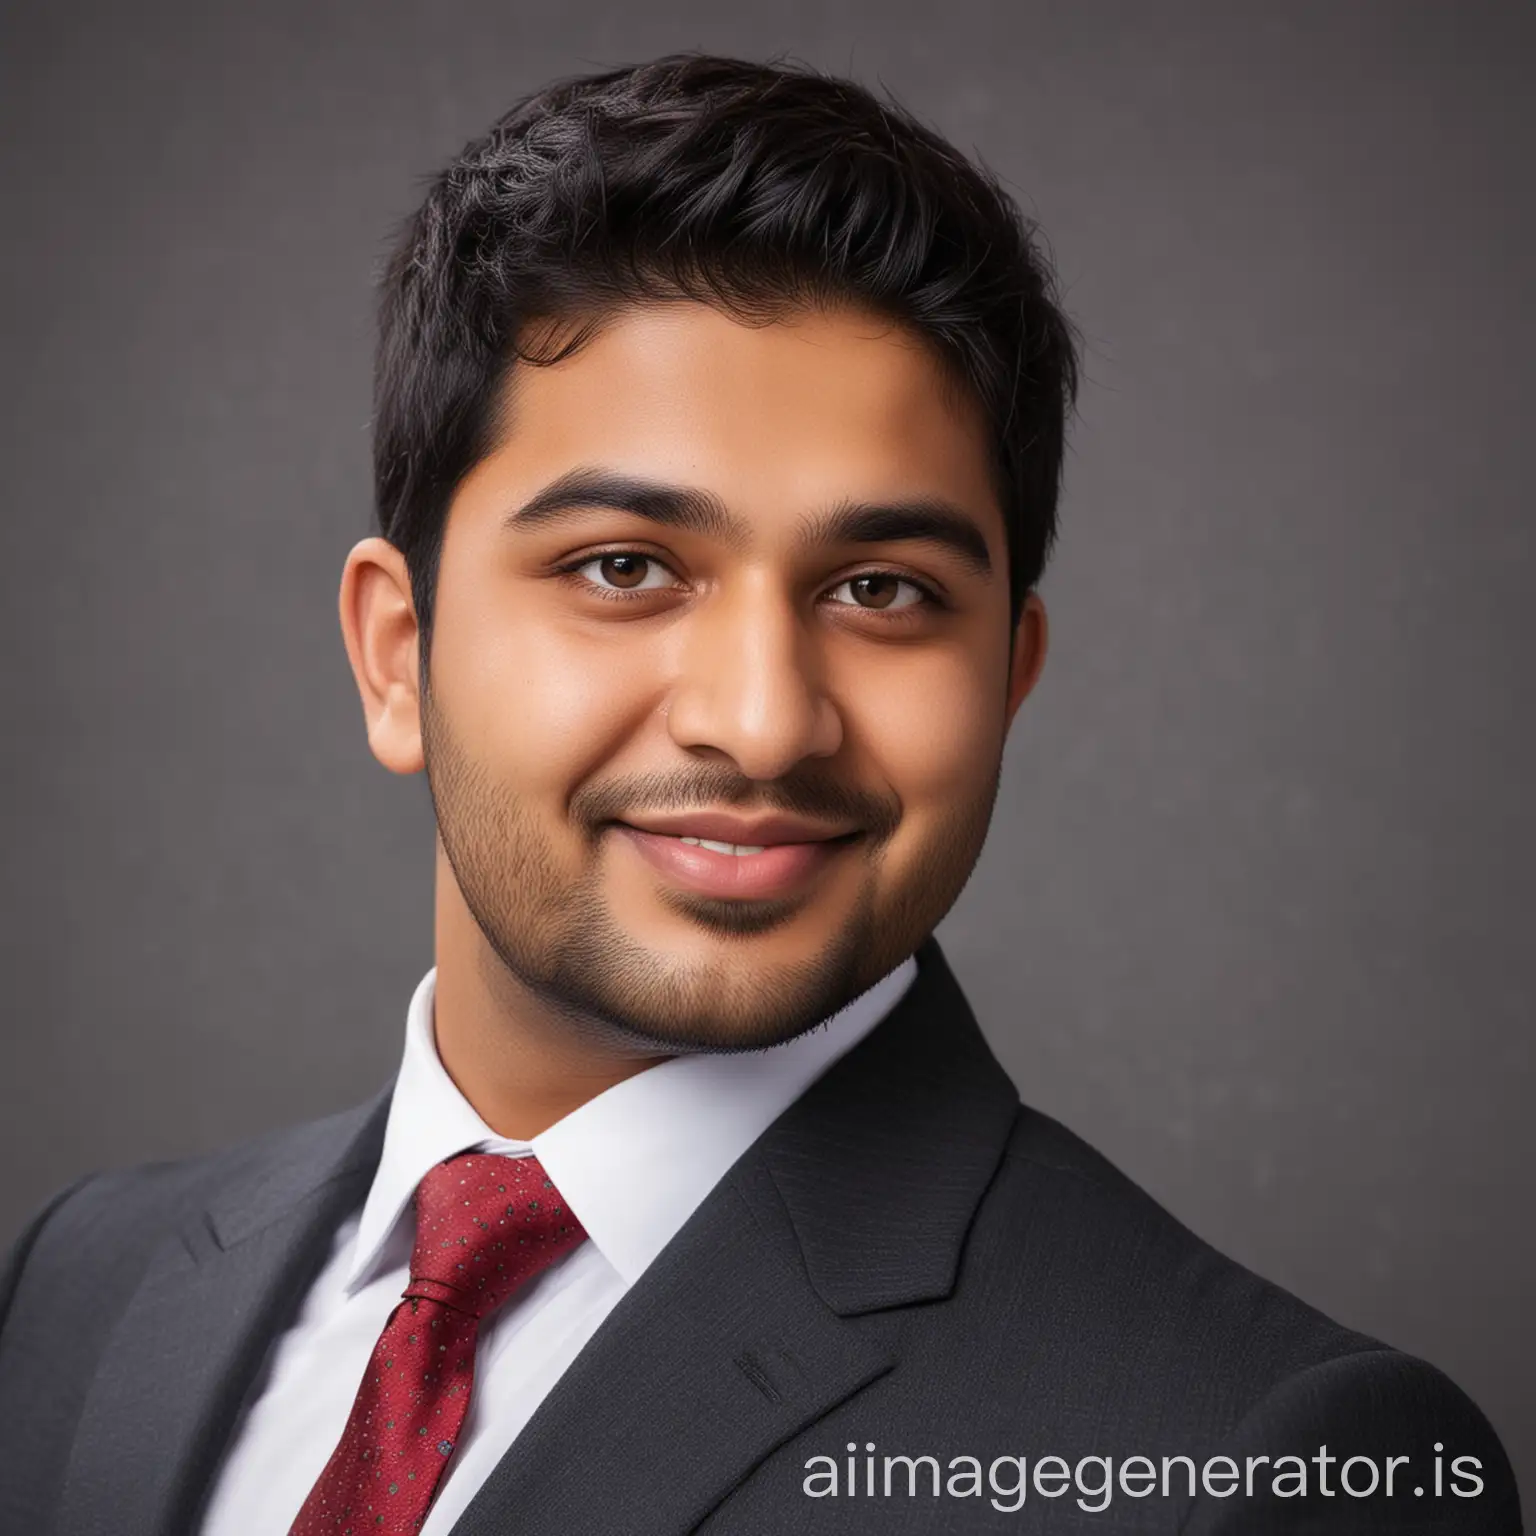 Professional Indian Man with chubby cheeks with suit